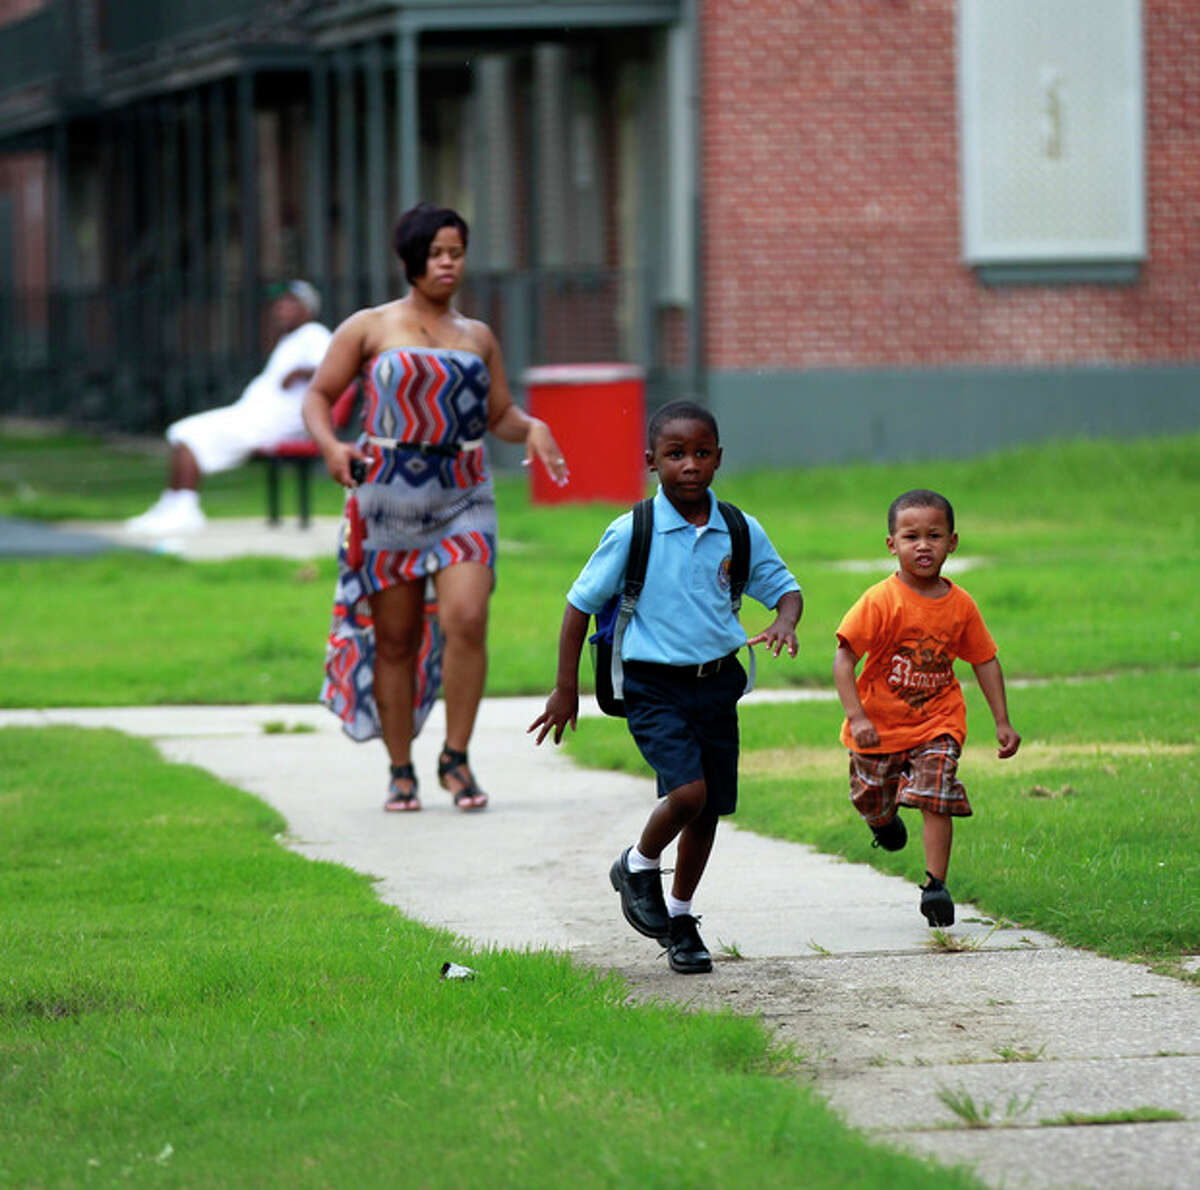 Children run in a courtyard of the Iberville housing projects, slated to be torn down, in New Orleans, Thursday, Aug. 23, 2012. The face of New Orleans is changing: Seven years after Hurricane Katrina the city many said would not recover is racially more diverse, and whiter, younger and richer; indicators not of failure but its success at reinventing itself. In fact, the city is experiencing a boom, and even gentrifying.(AP Photo/Gerald Herbert)